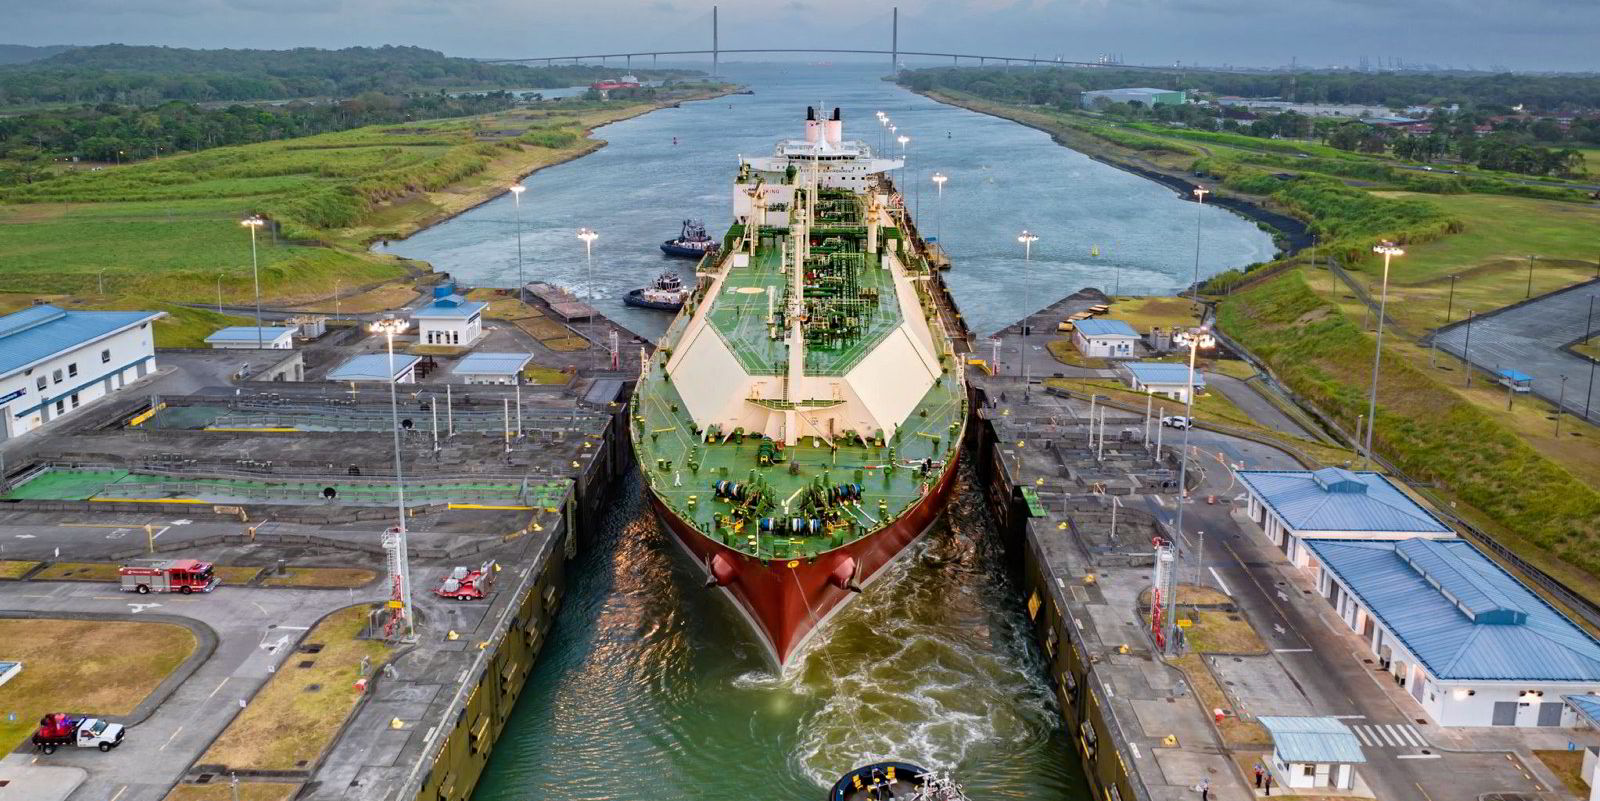 Soaring Fees at Panama Canal Have LNG Shippers Taking Long Route - BNN  Bloomberg